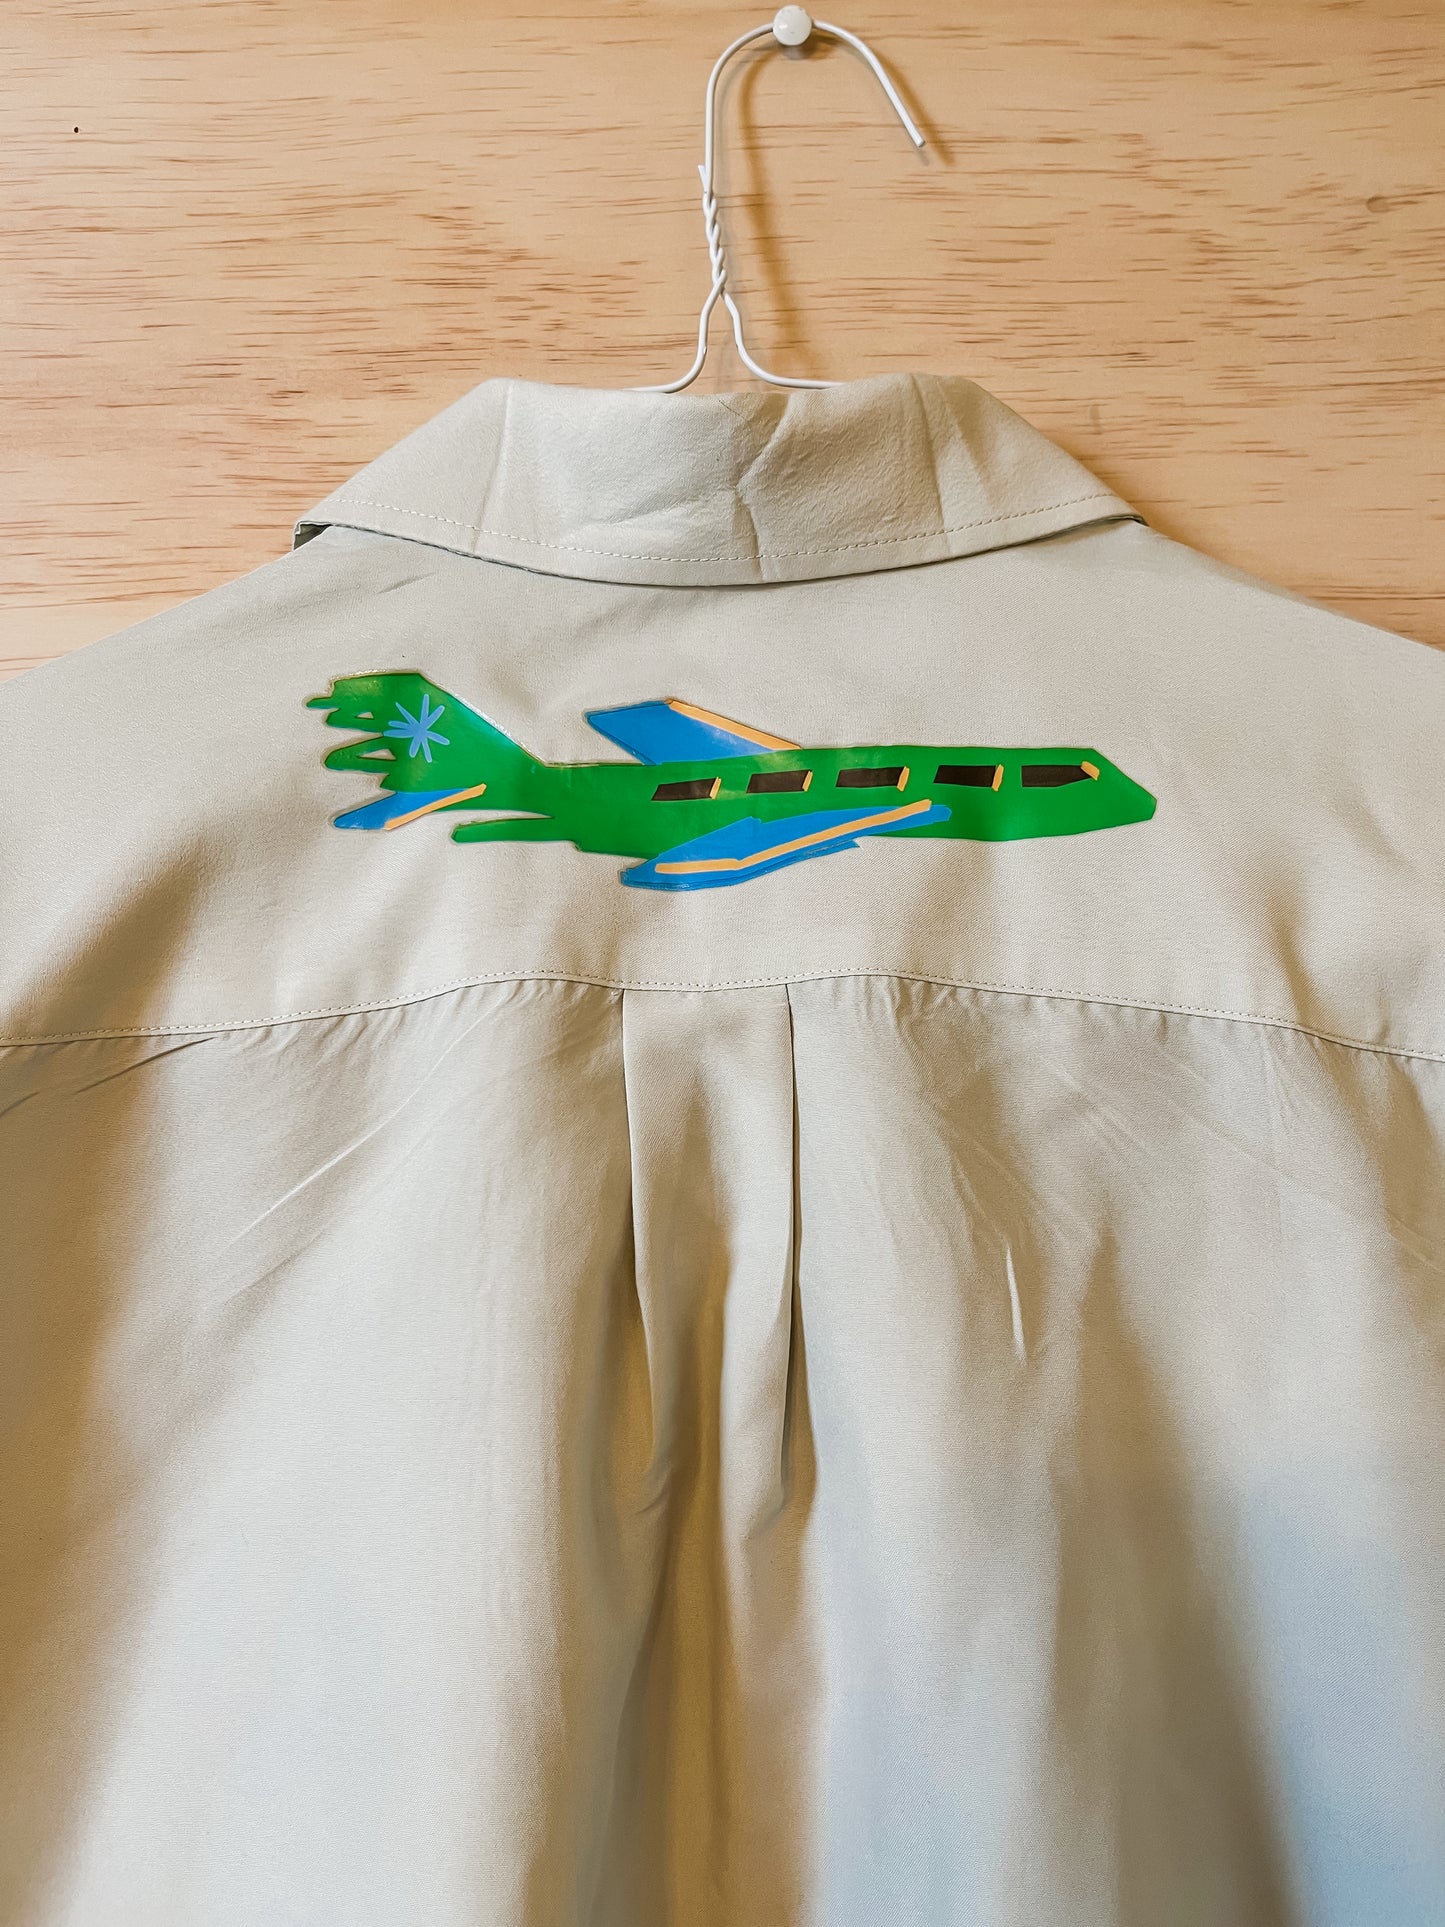 Beige/Green-ish Shirt With Small Planes on Chest